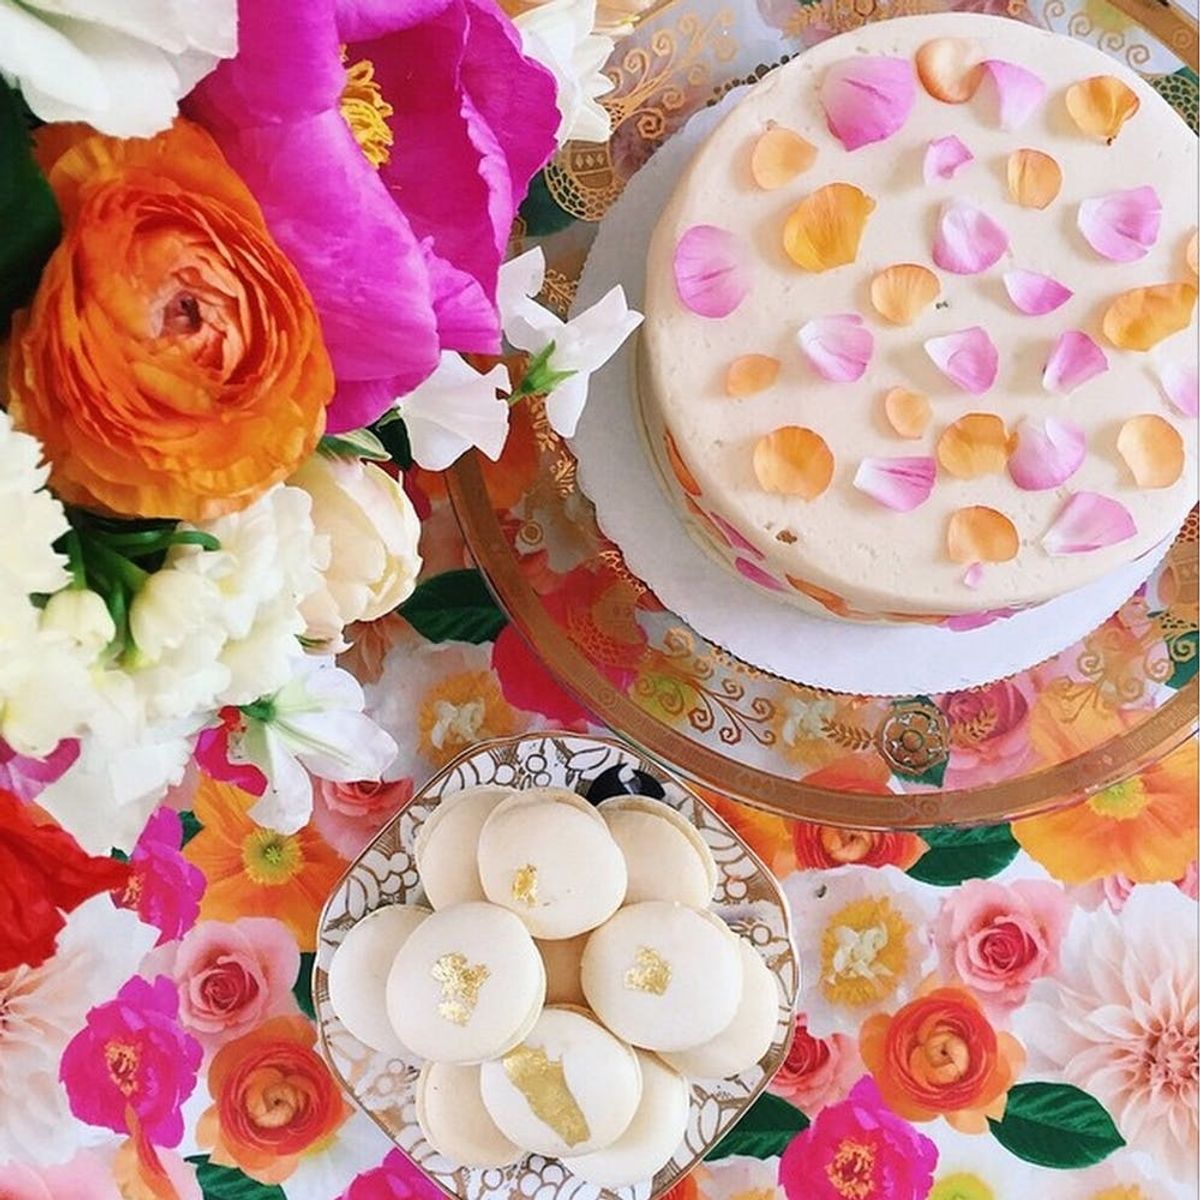 Attention Future Brides: 15 Instagrams to Follow for Major Wedding Inspo